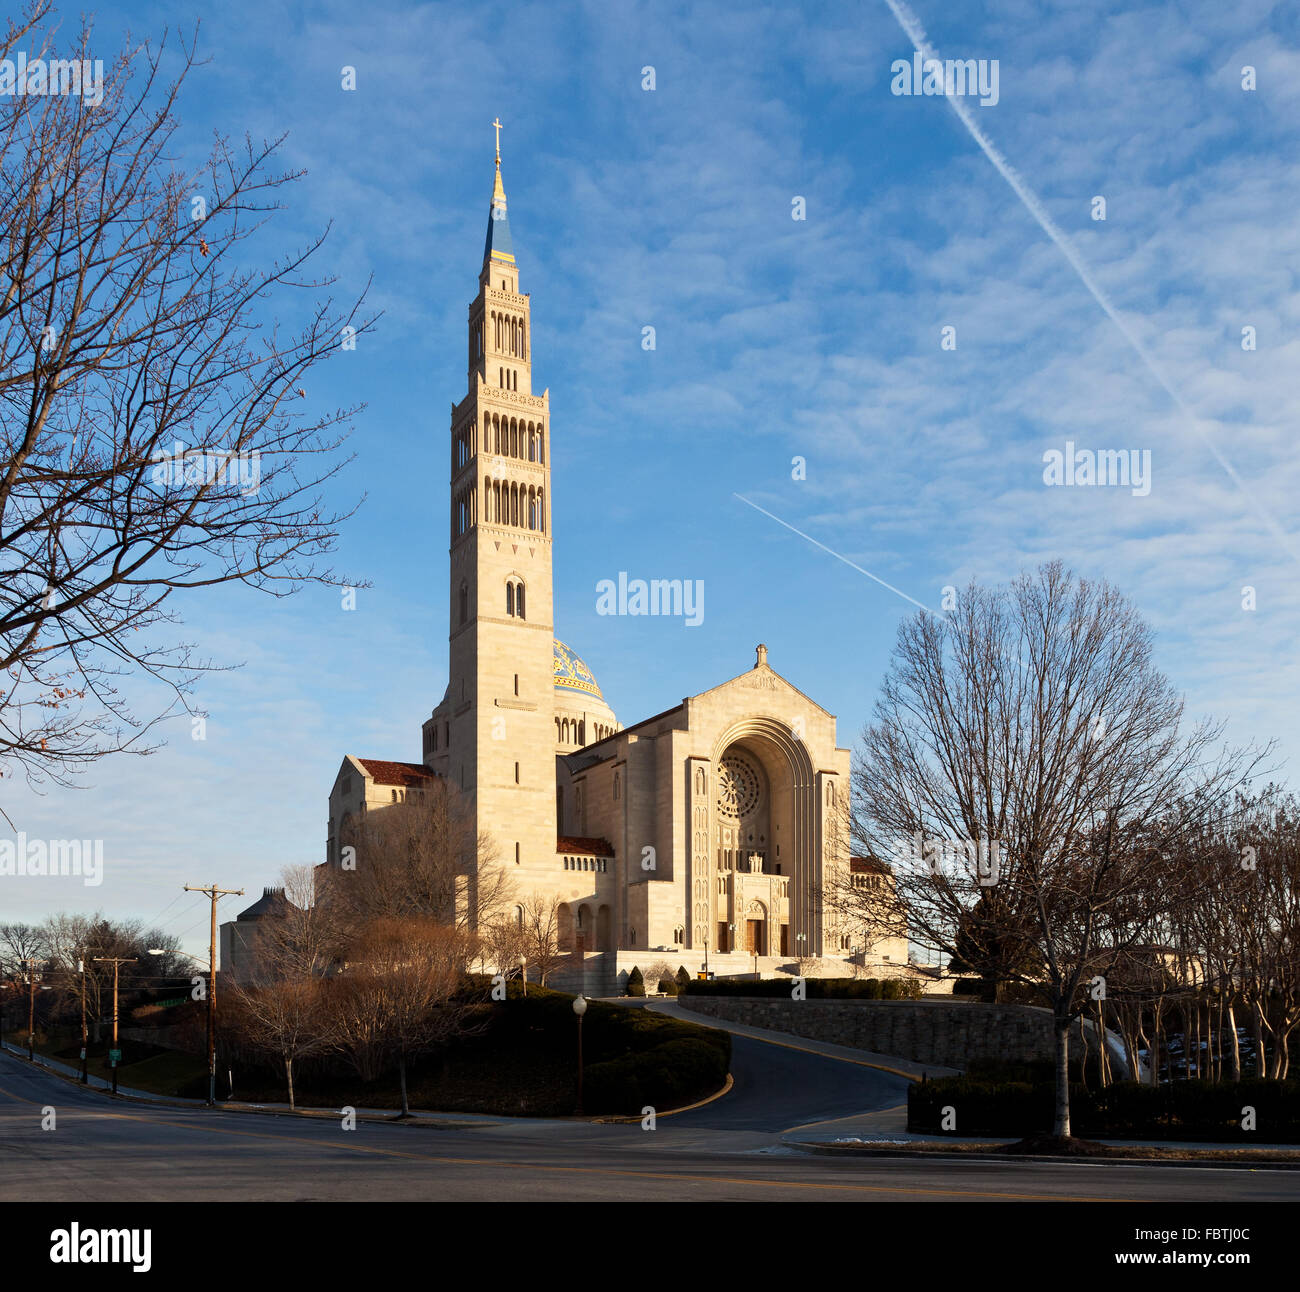 Basilica of the National Shrine of the Immaculate Conception Stock Photo